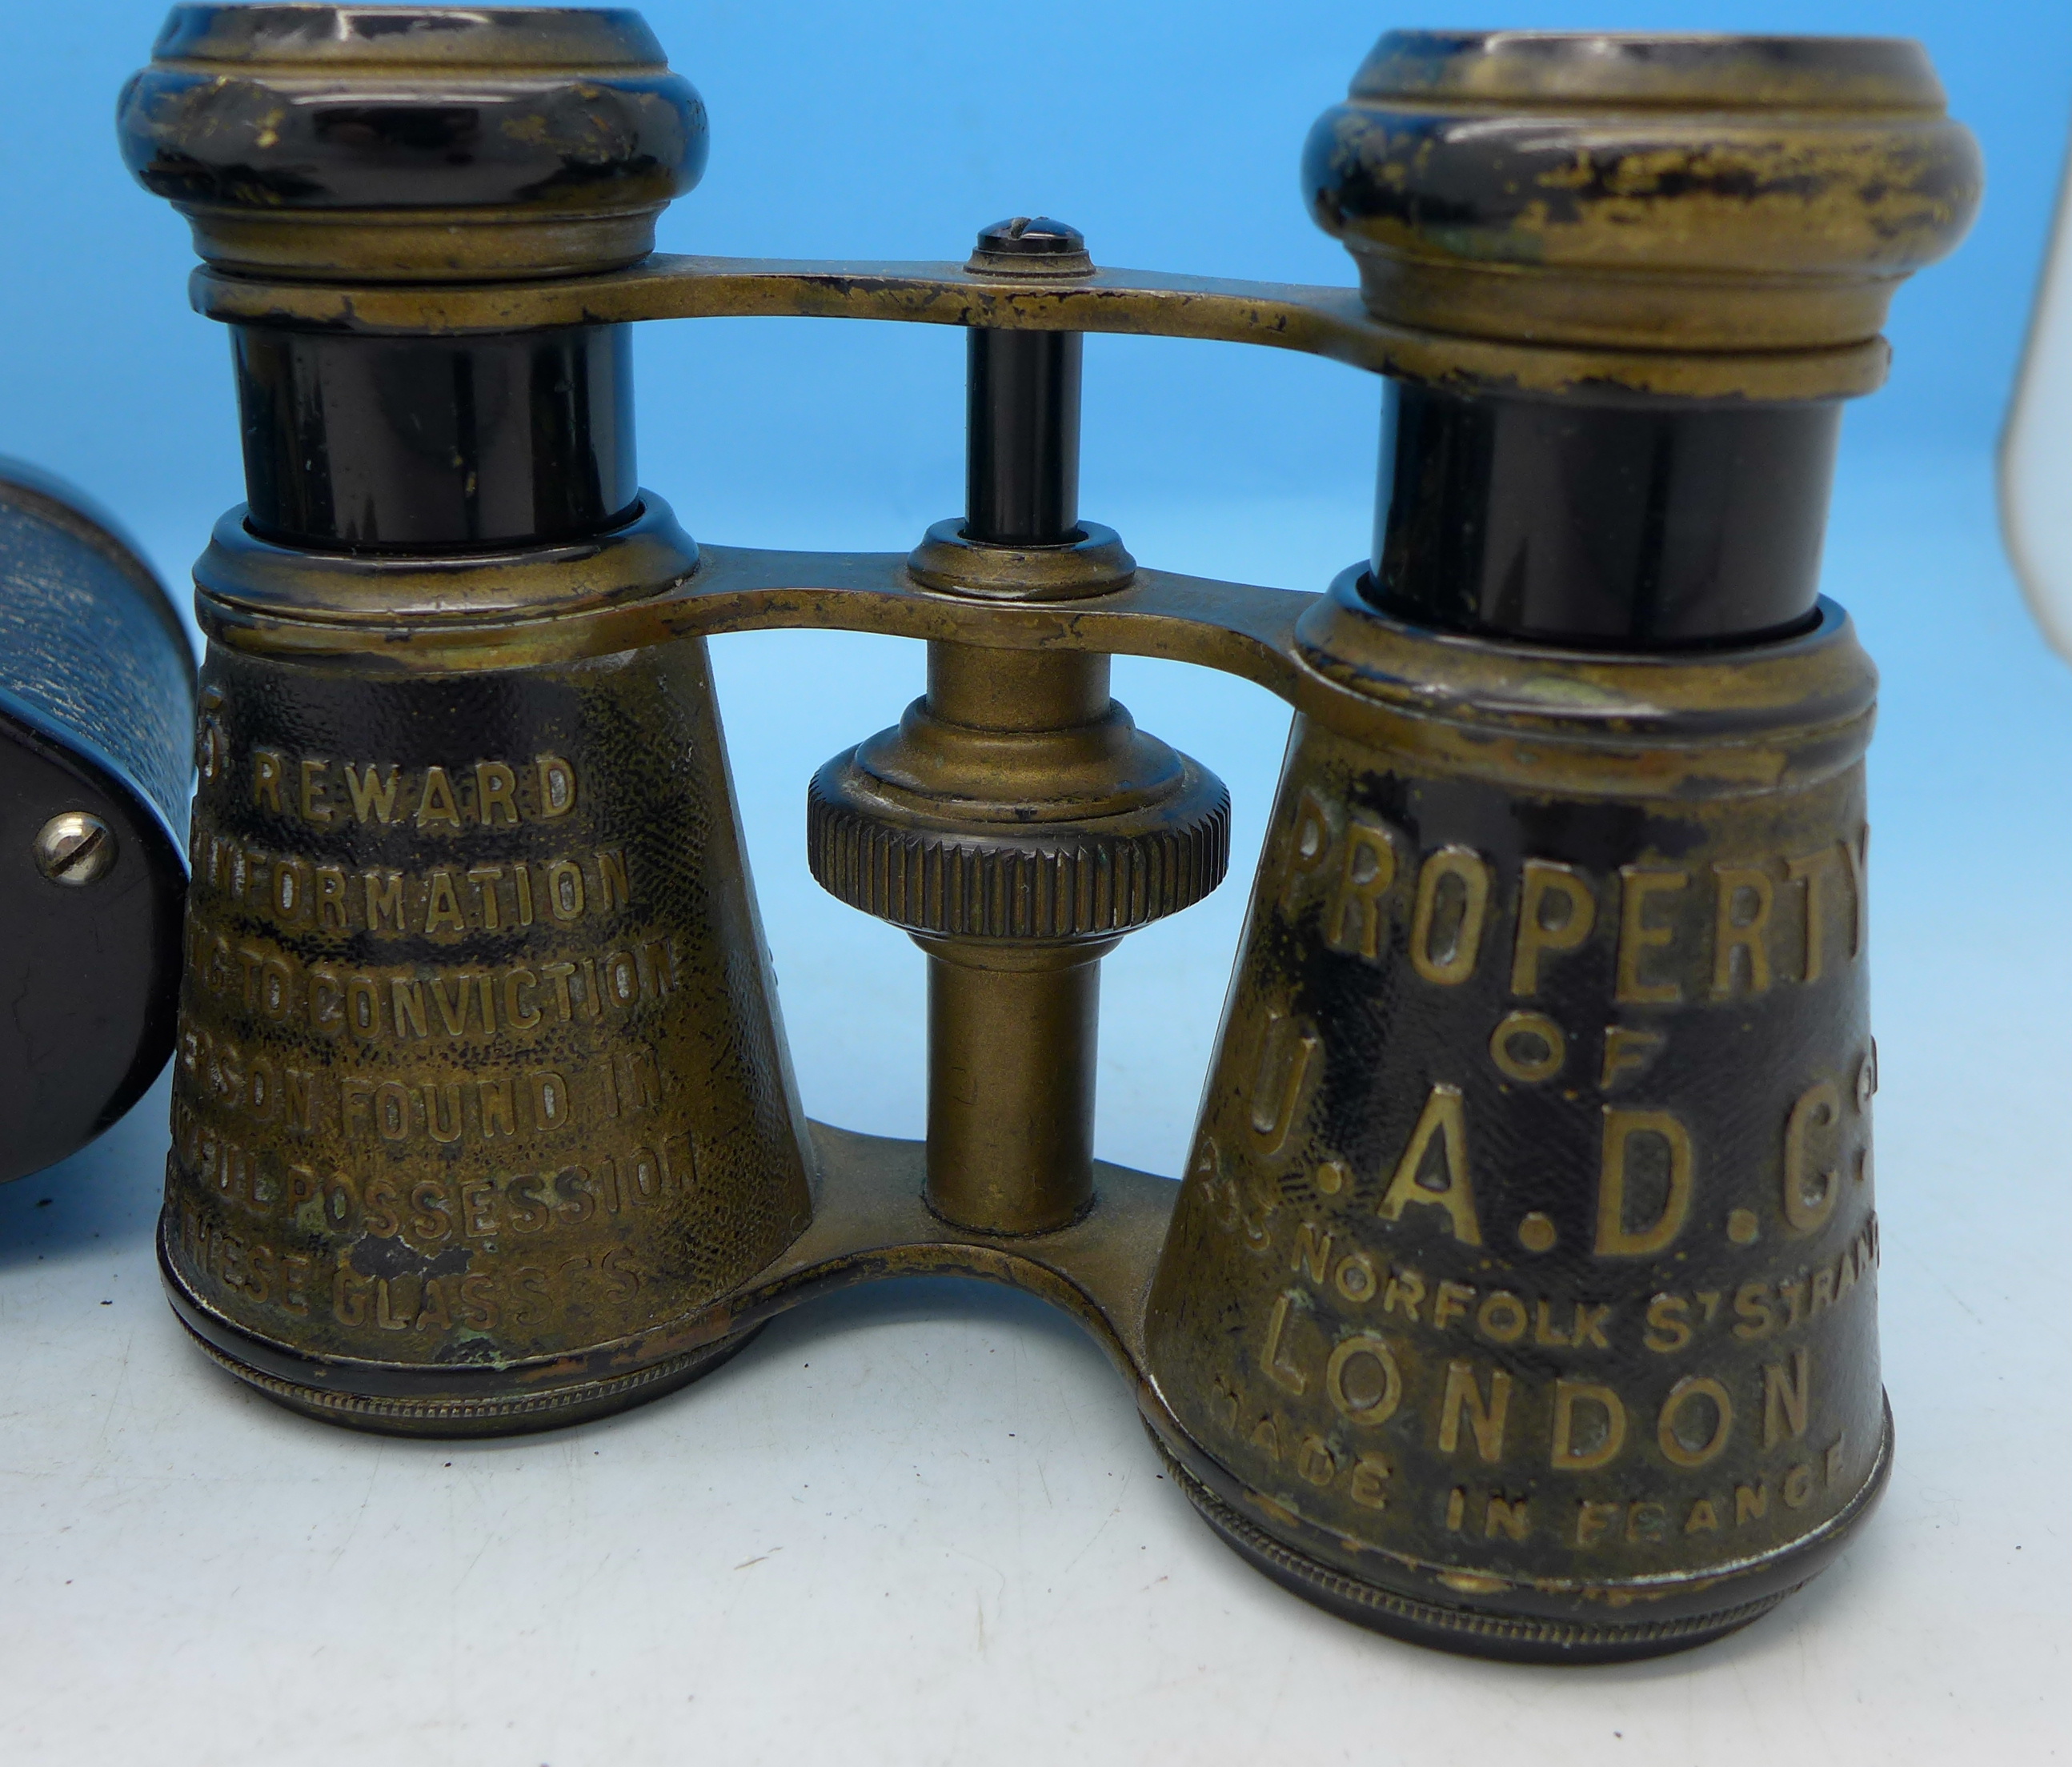 A pair of WWII Taylor-Hobson x6 binoculars and a pair of opera glasses with Property of U.A.D.C. - Image 4 of 4